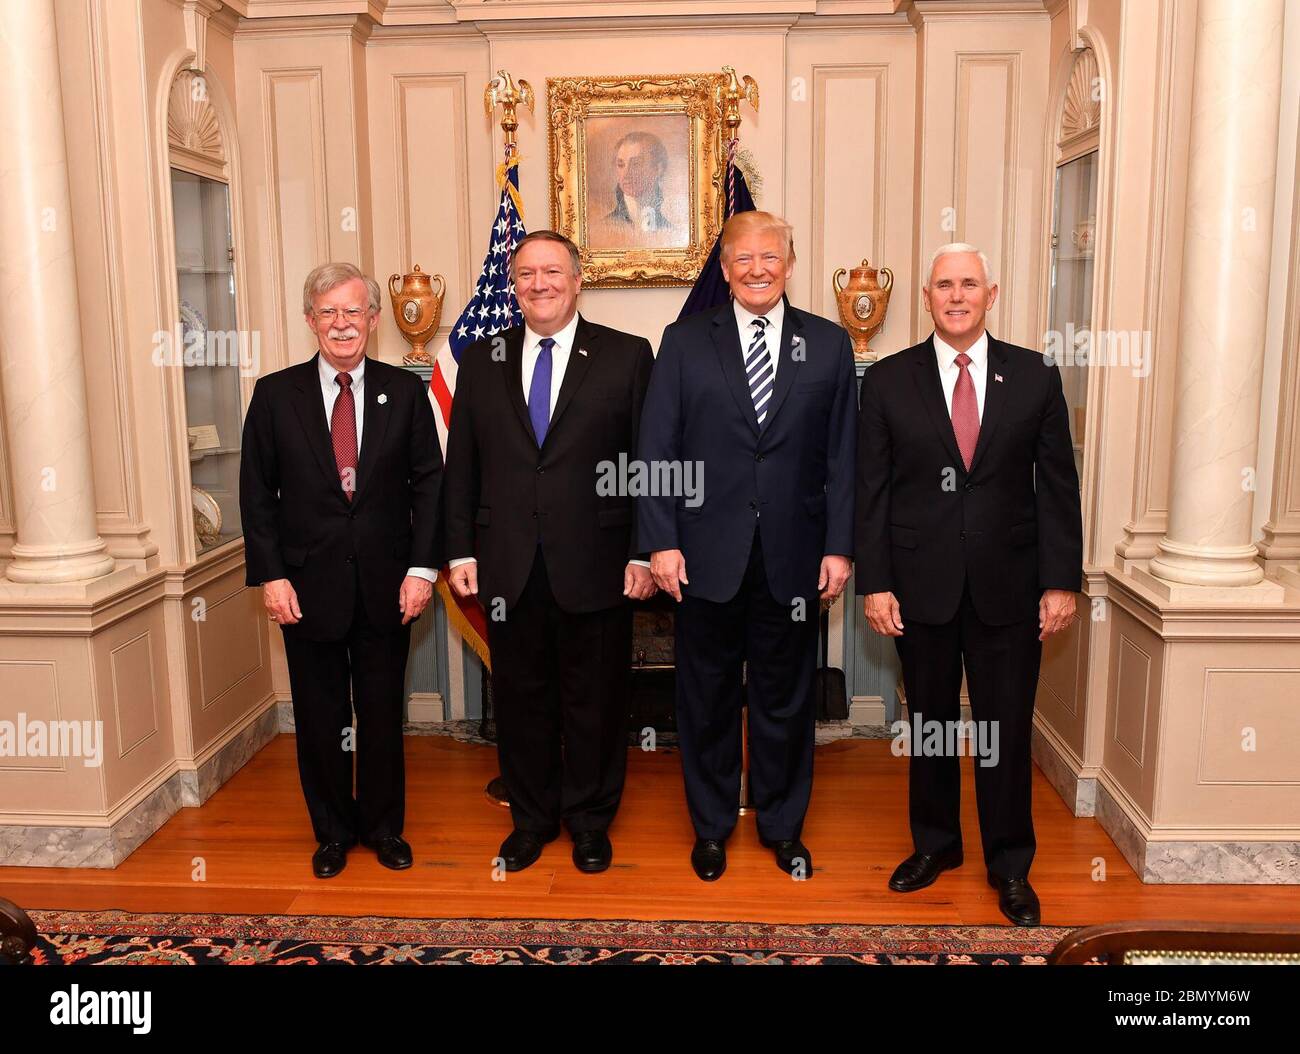 Secretary Pompeo Poses for a Photo With U.S. Secretary of State Mike Pompeo poses for a photo with (L to R) National Security Advisor of the United States John Bolton, President Donald J. Trump and Vice President Mike Pence before his swearing-in ceremony at the U.S. Department of State in Washington, D.C., on May 2, 2018. Stock Photo